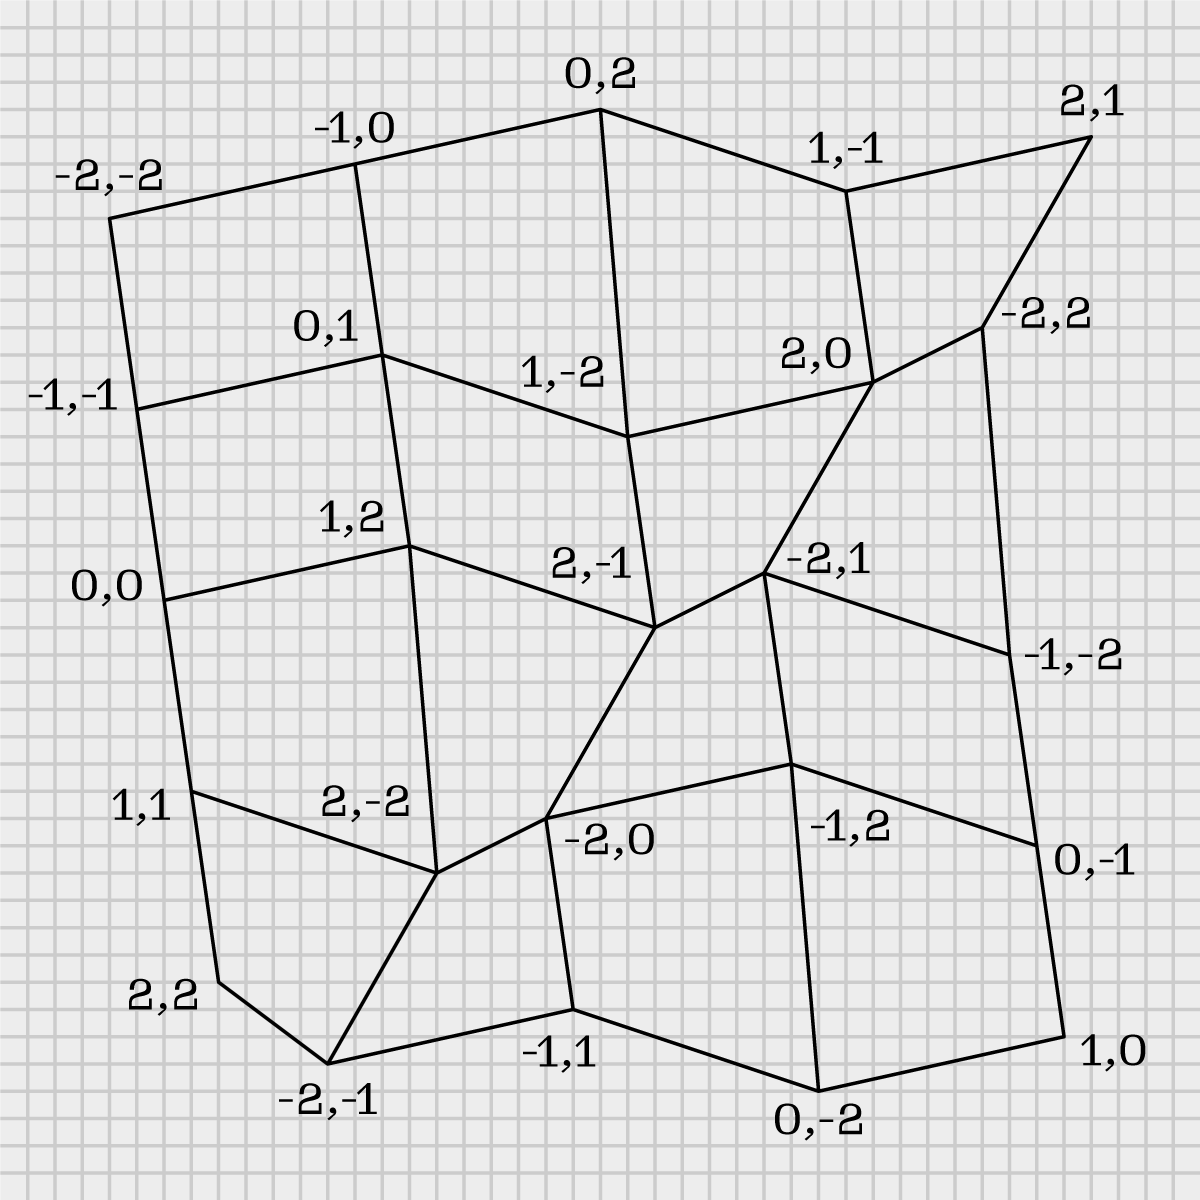 A mutated 4×4 grid whose intersections all align to the finer grid beneath it. Each intersection’s coordinates are labeled.